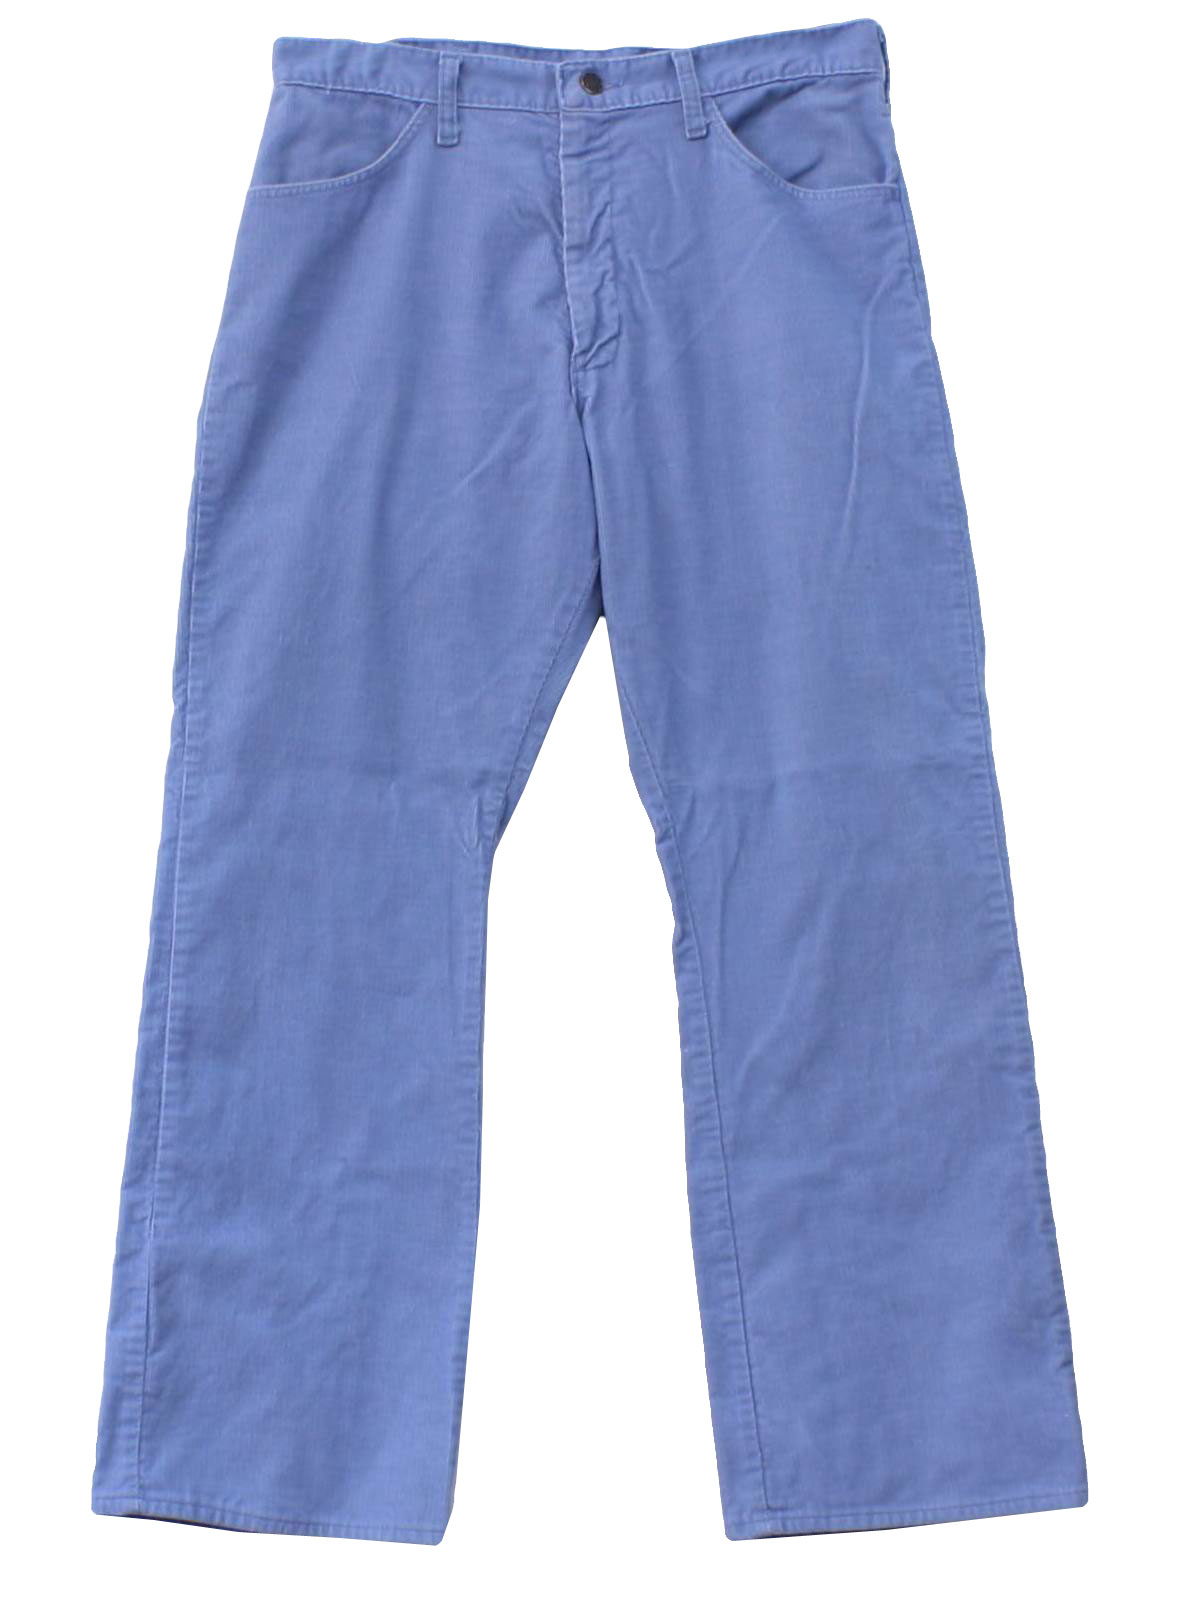 1970s Flared Pants / Flares: 70s -Jean St., Montgomery Ward- Mens light ...